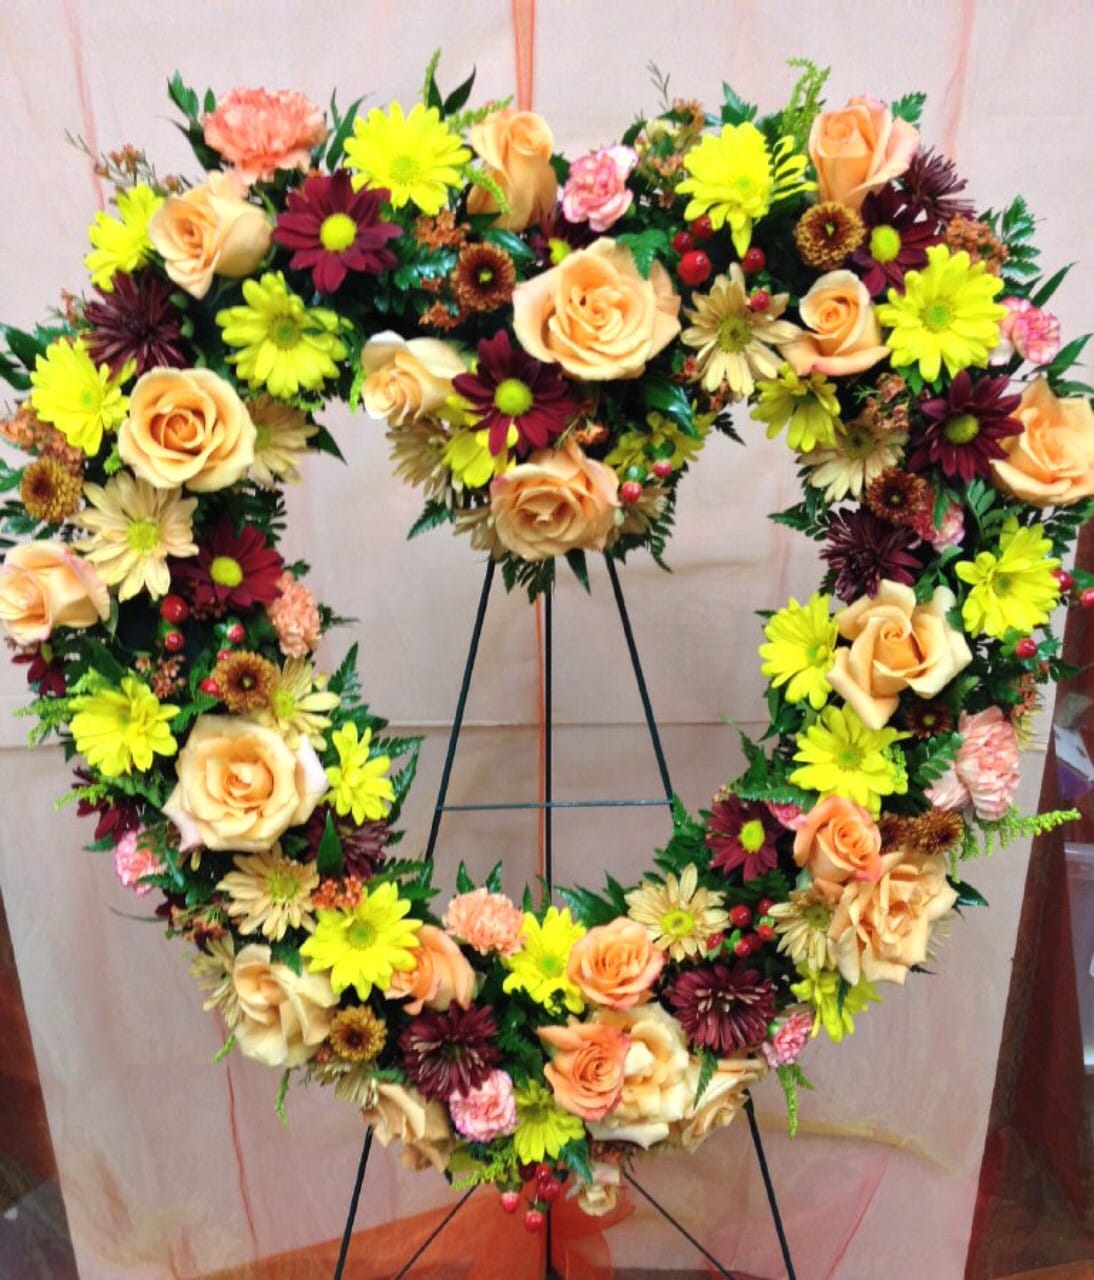 Rustic Reminiscing Heart - This beautiful rust, butterscotch, and yellow heart-shaped floral arrangement on an easel offers a calming and graceful sentiment for a funeral. The vibrant colors bring a feeling of warmth and peace, expressing an everlasting love and fond memories. The vibrant colors and floral blooms, such as roses, carnations, and daisies, bring forth a loving beauty, making it a wonderful tribute for a special memorial service.